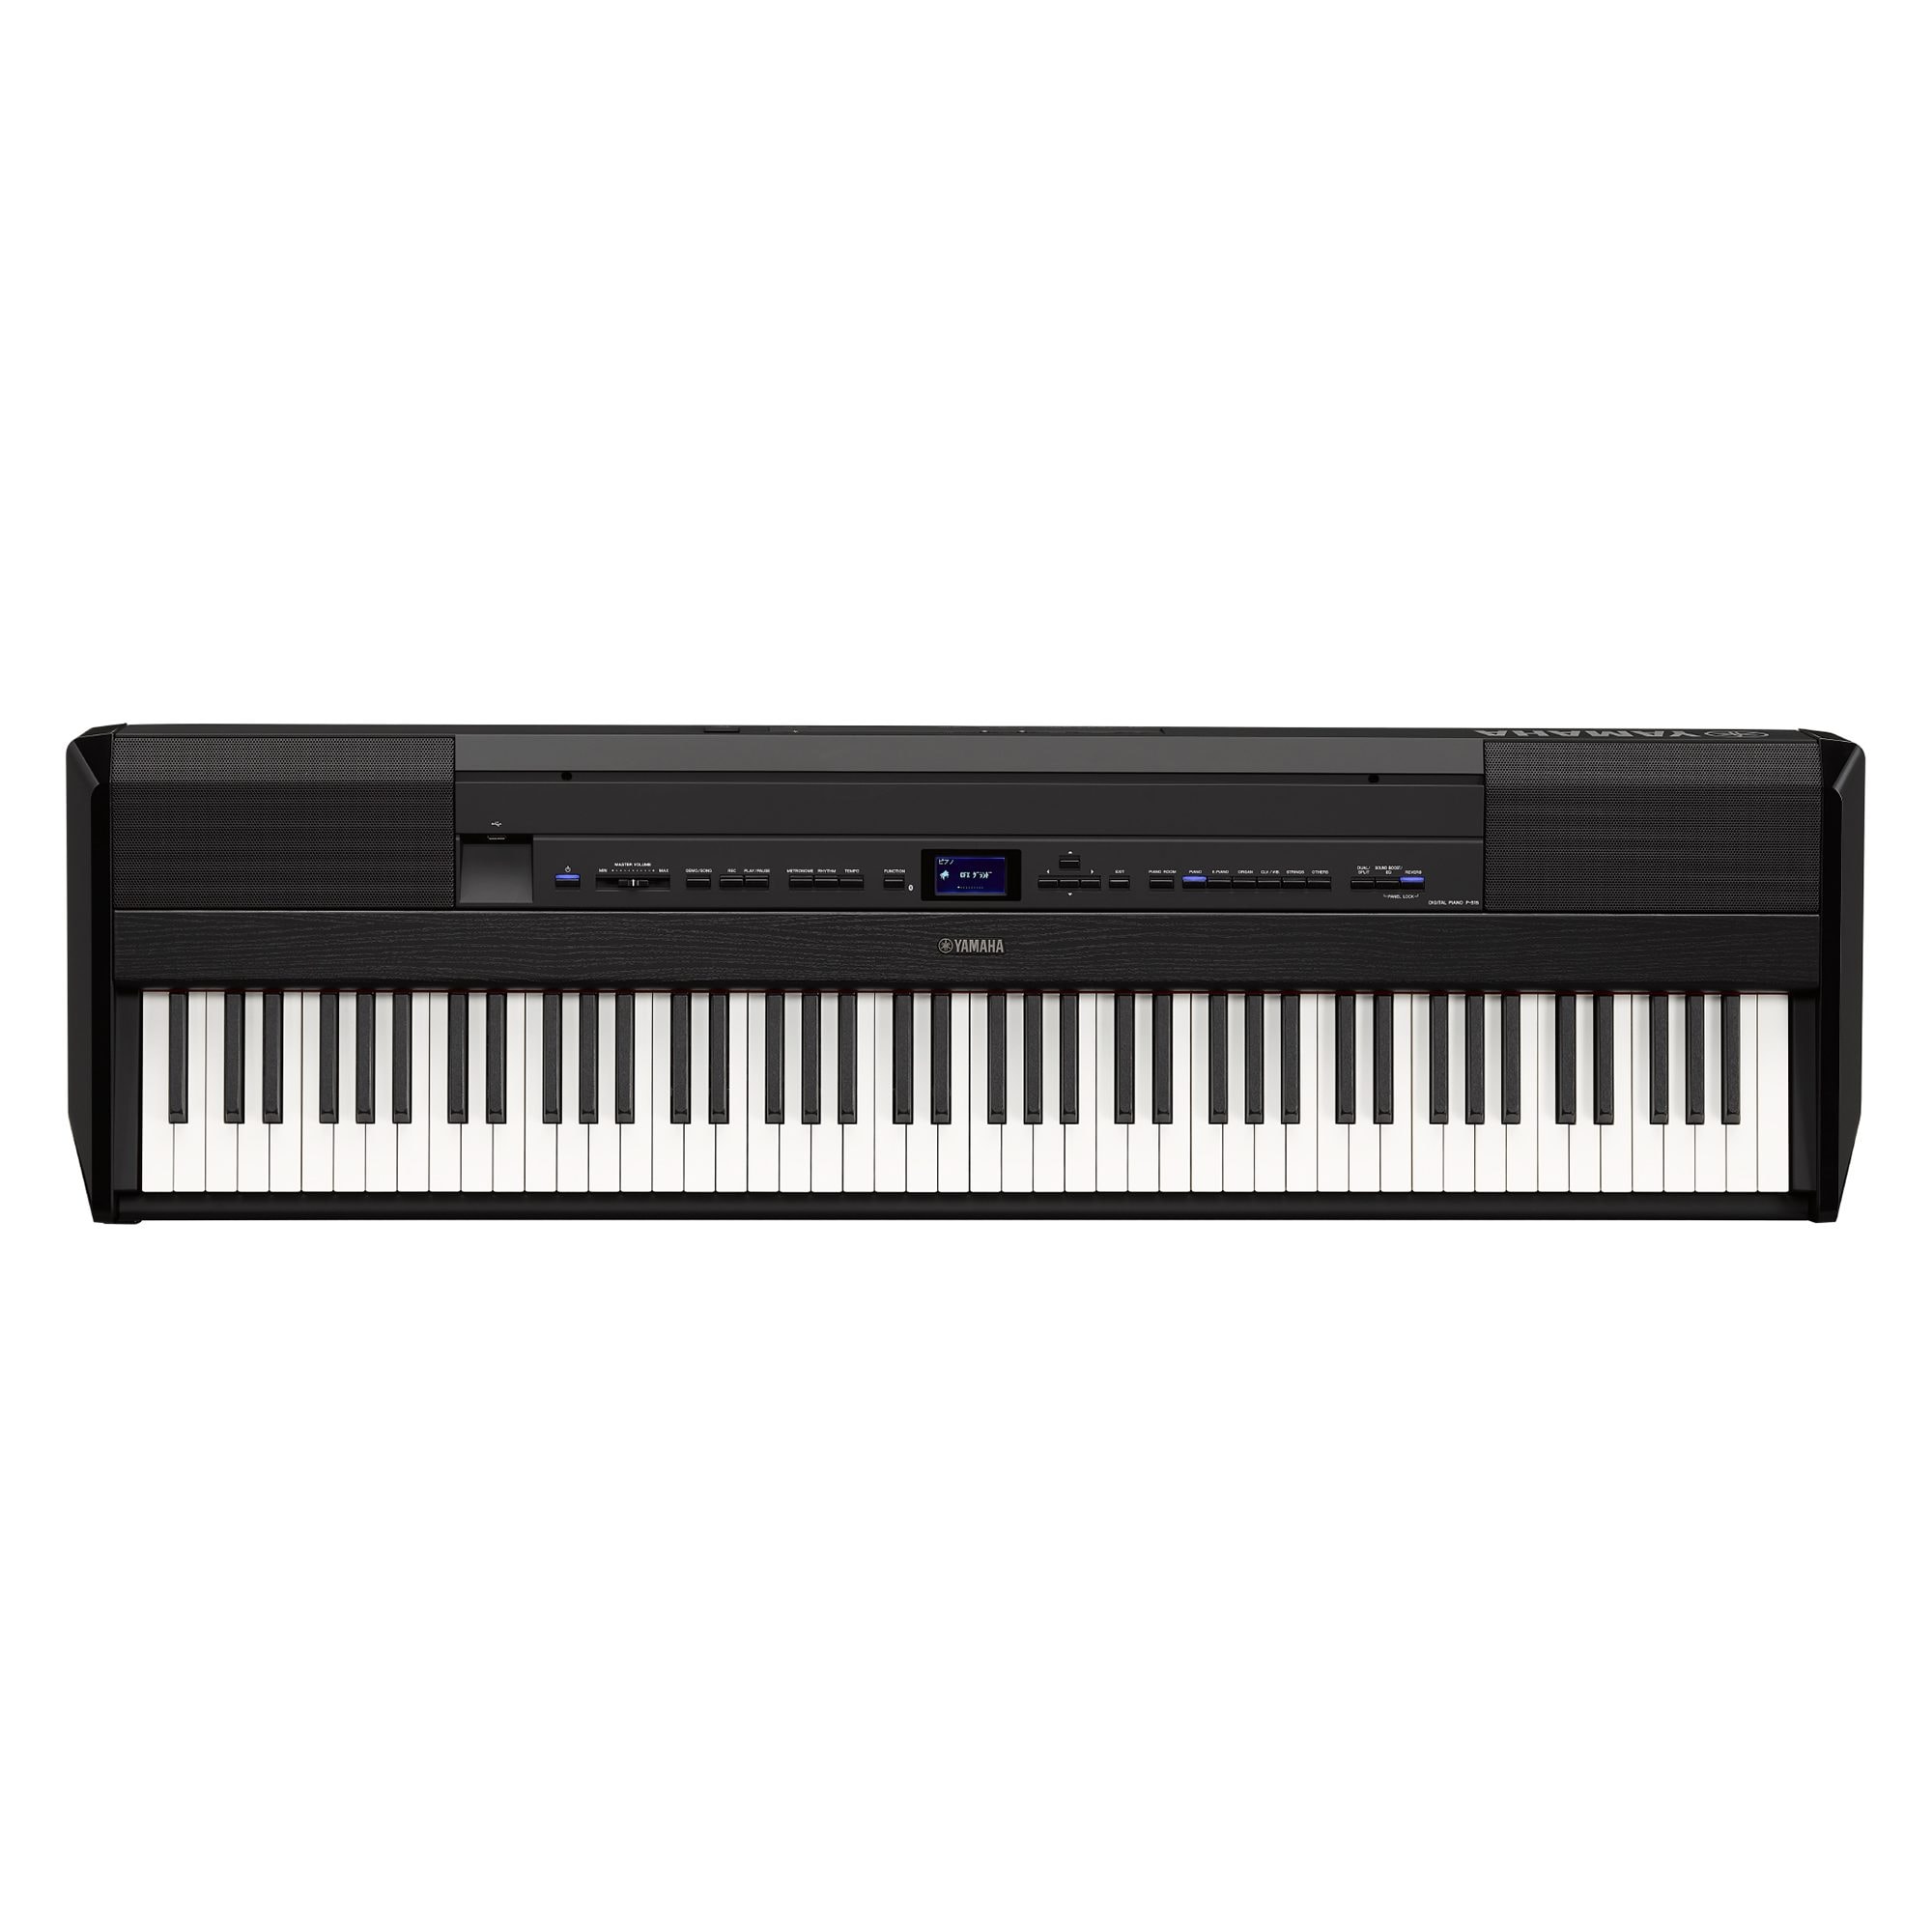 P-515 - Overview - Portables - Pianos - Musical Instruments 